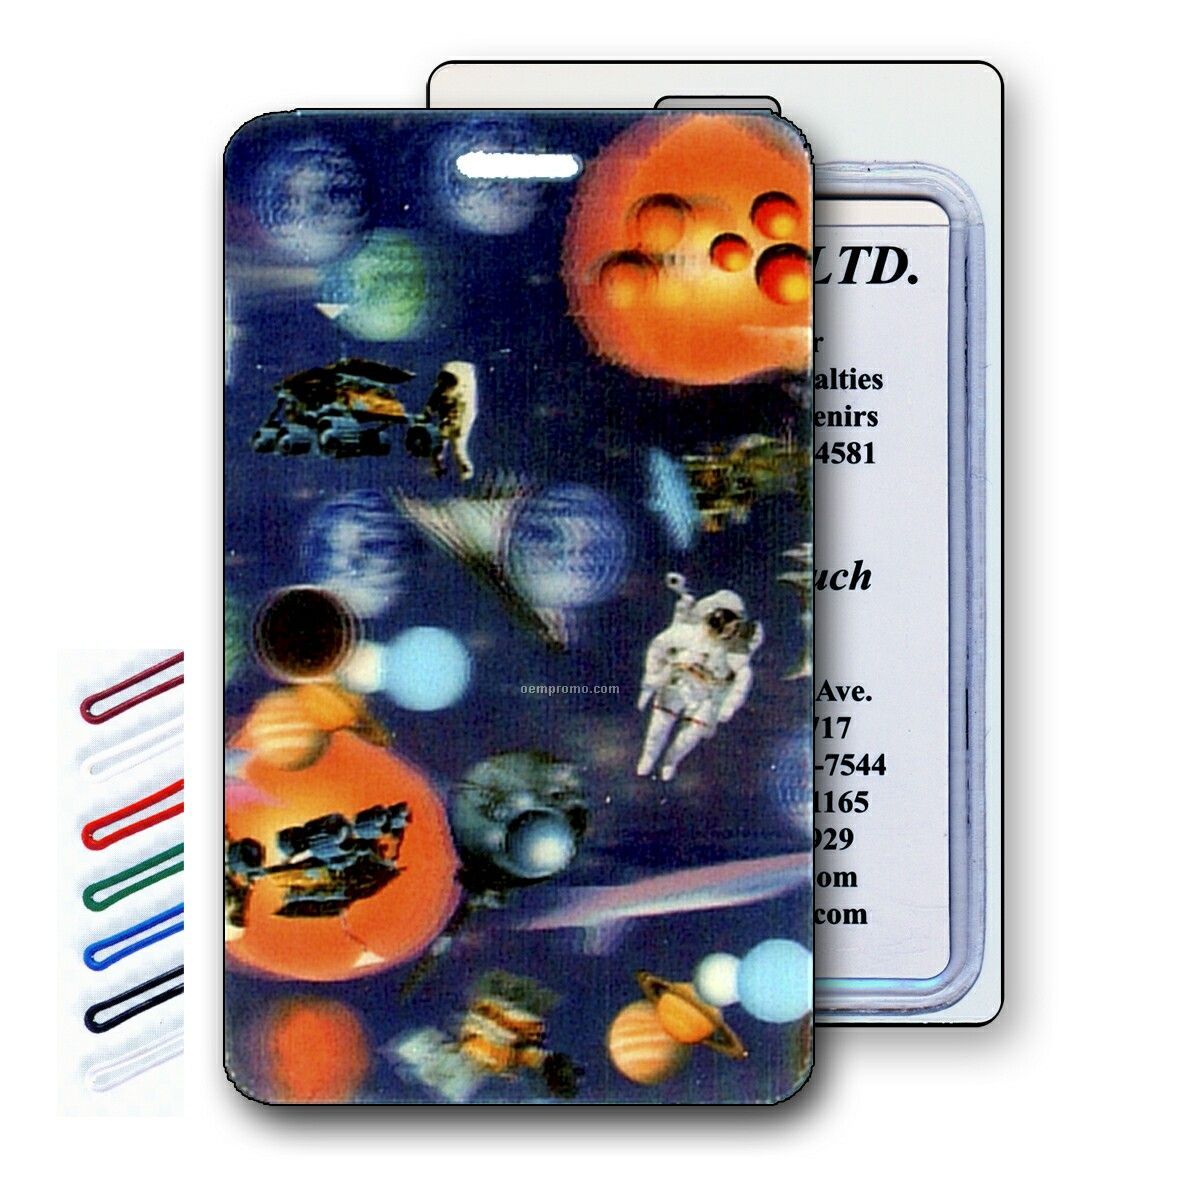 Lenticular Luggage Tags 3d Image (Space, Astronauts, Moon)